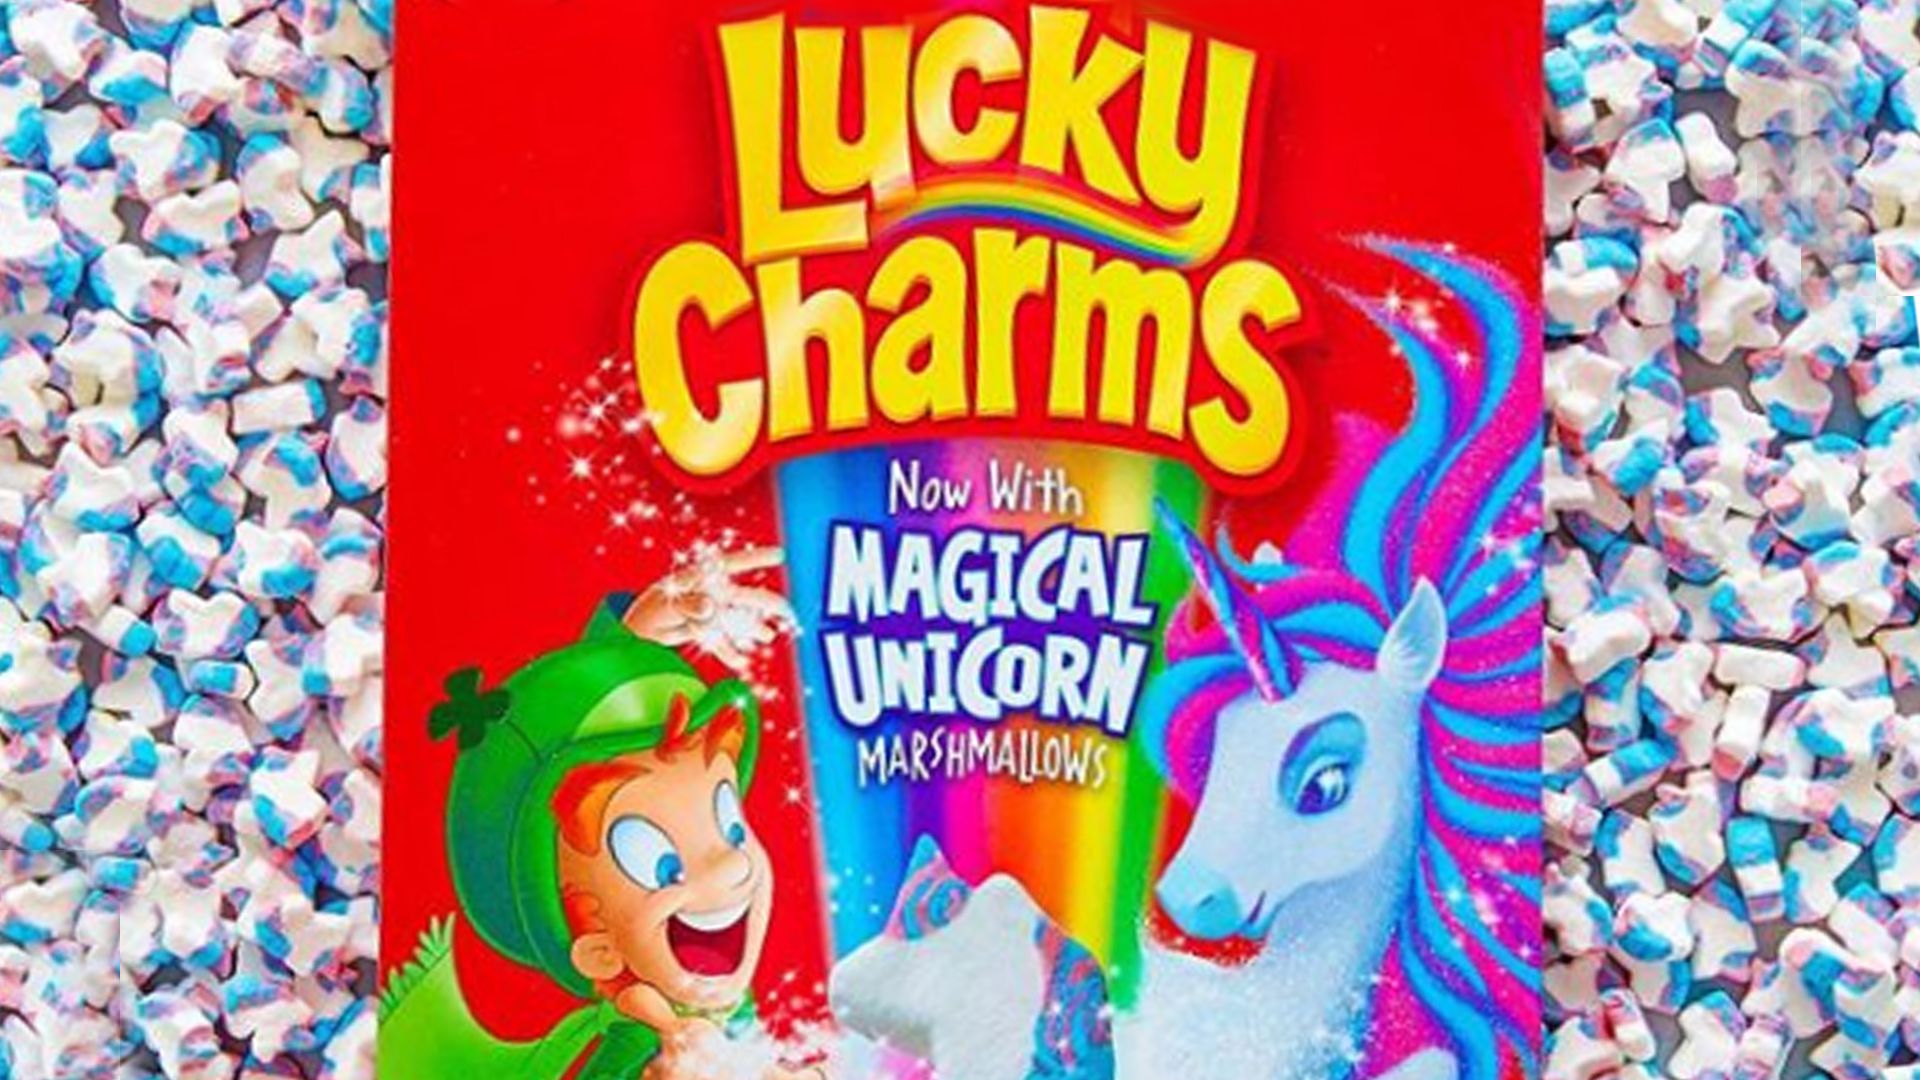 Lucky Charms adds unicorn marshmallow to its roster